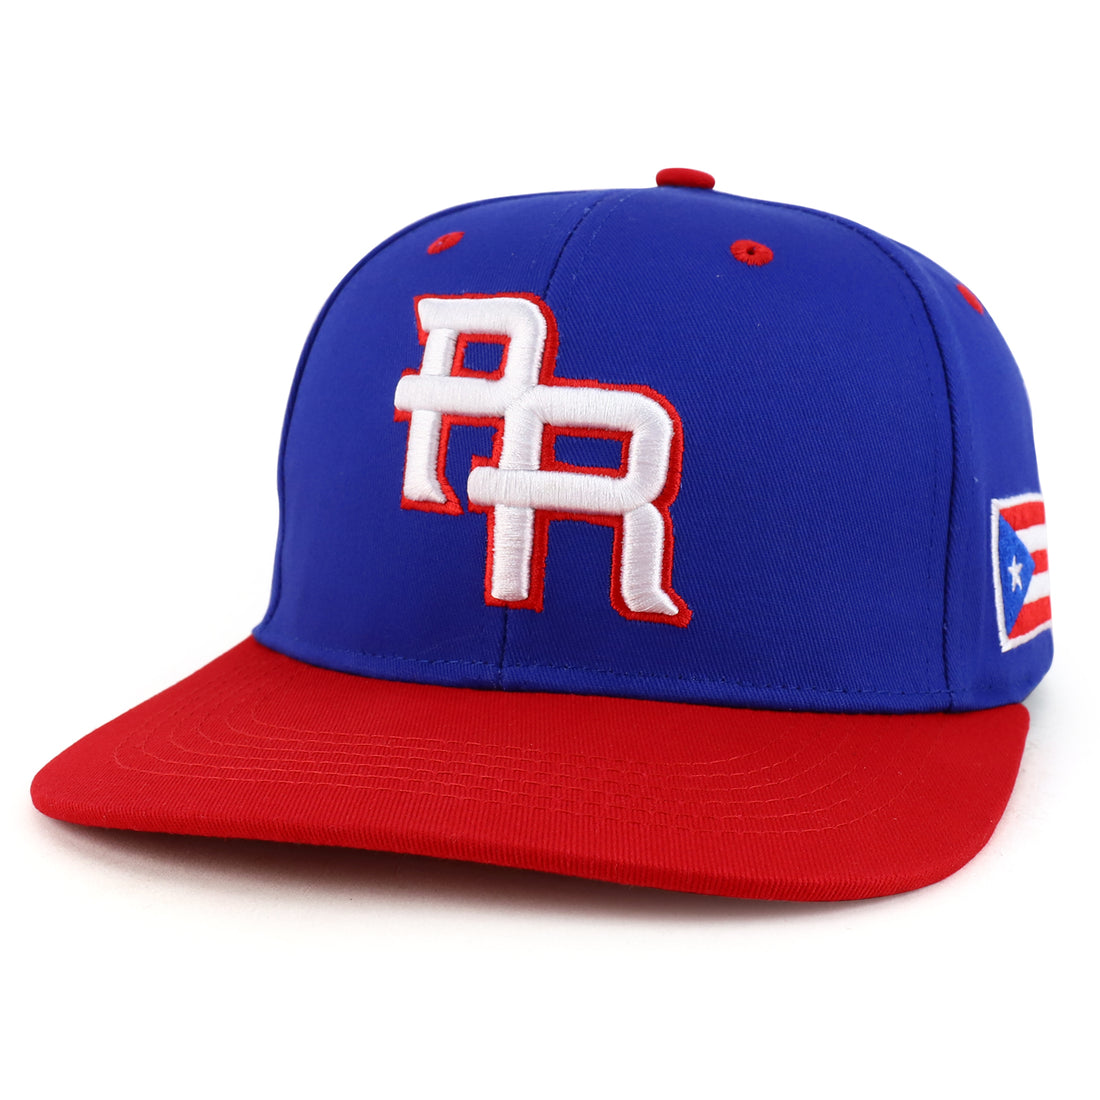 Trendy Apparel Shop PR 3D Embroidered Flatbill Snapback Cap with Puerto Rico Flag